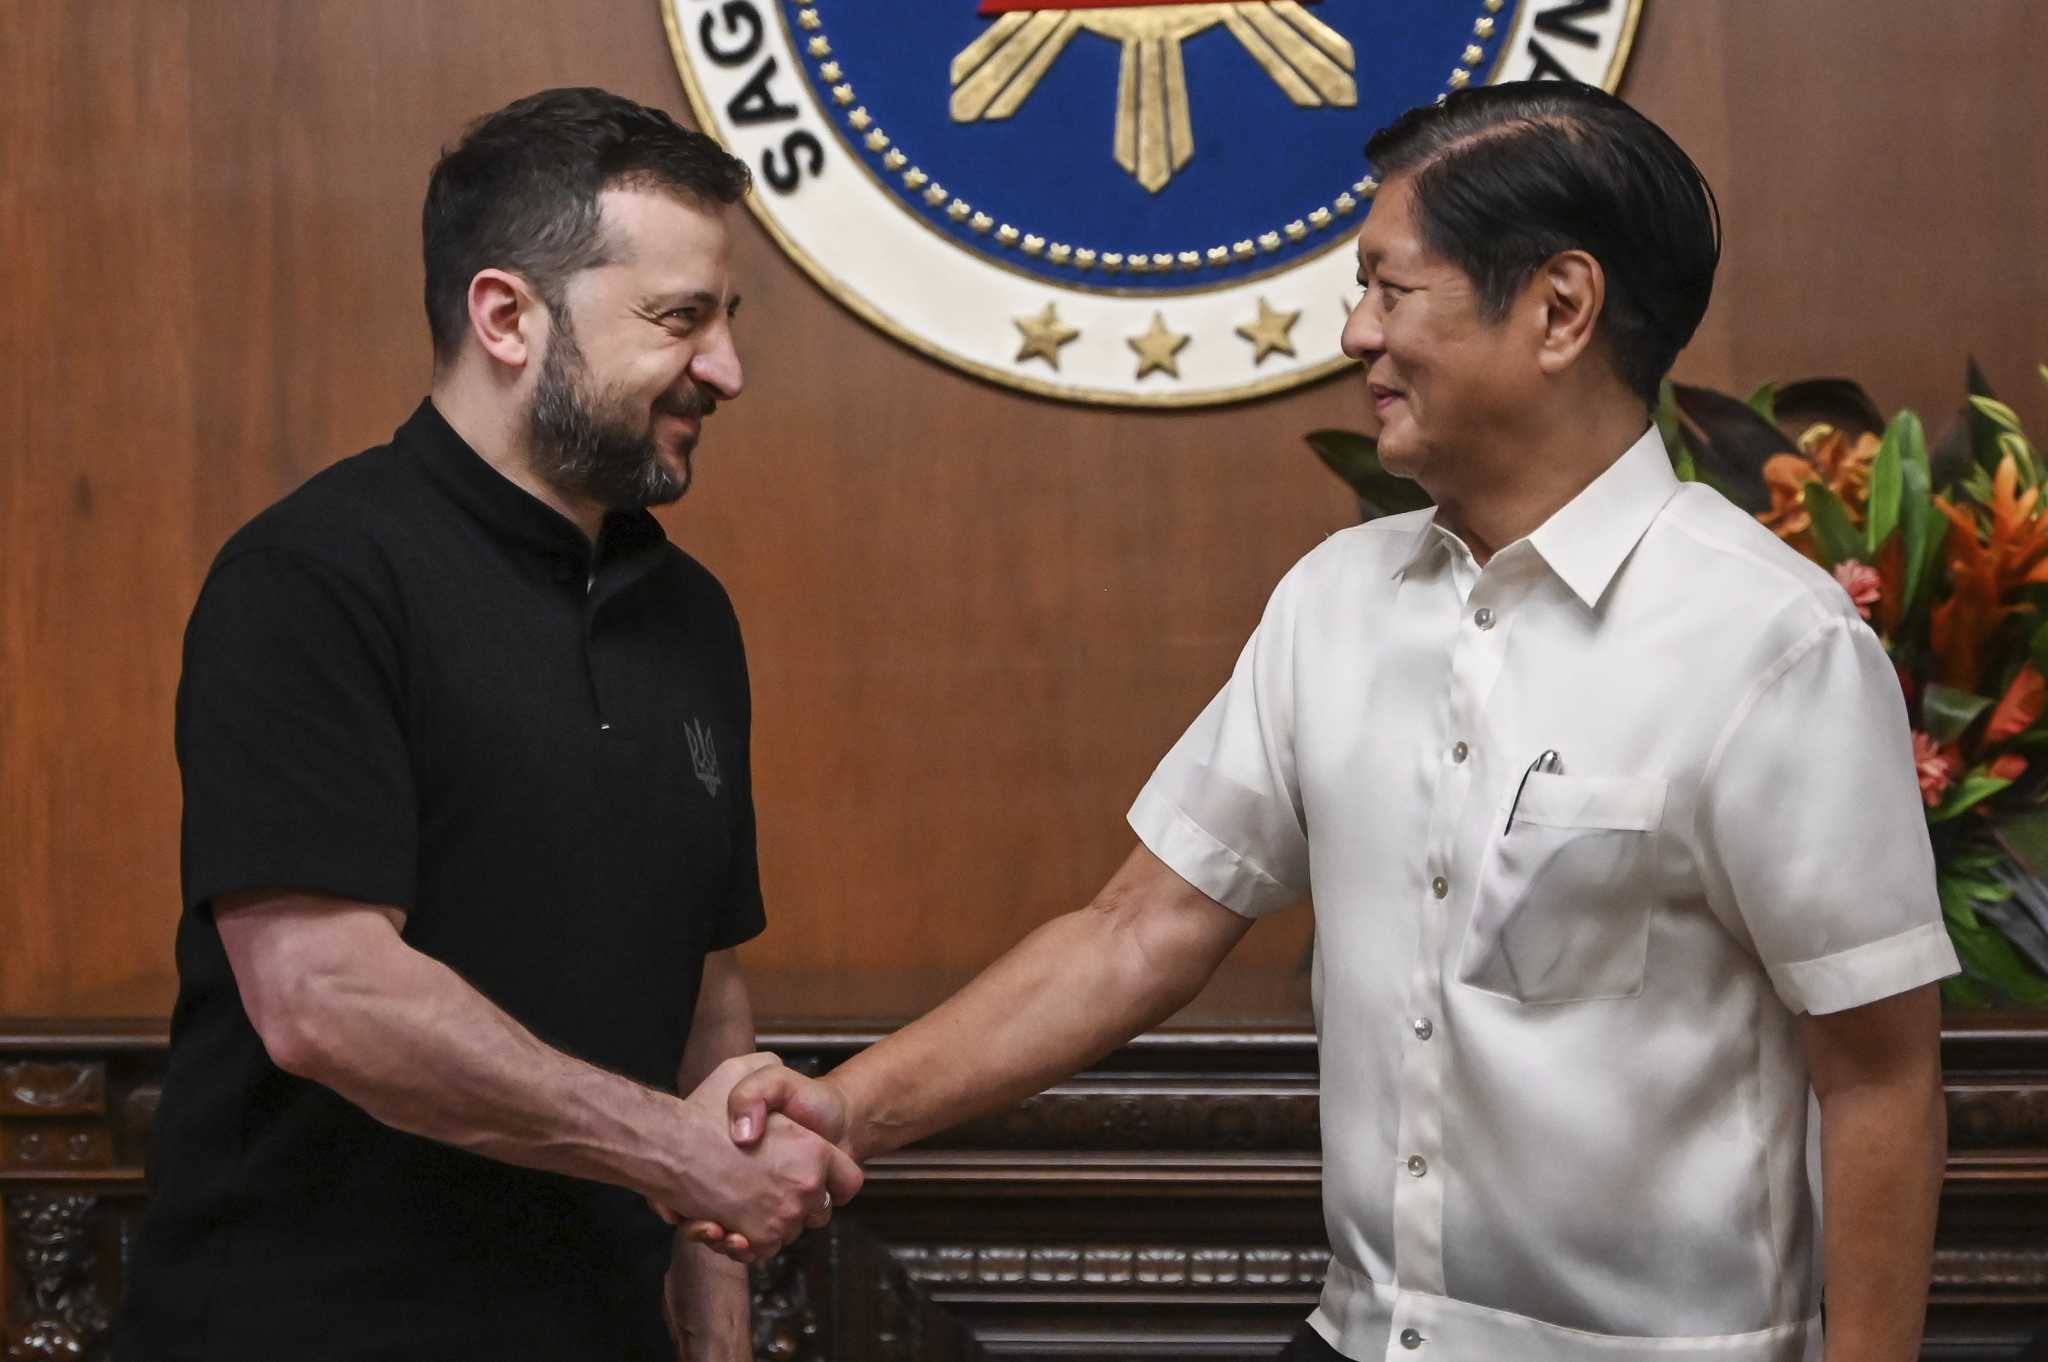 Zelenskyy in Manila to promote peace summit, which he says China and Russia are trying to undermine